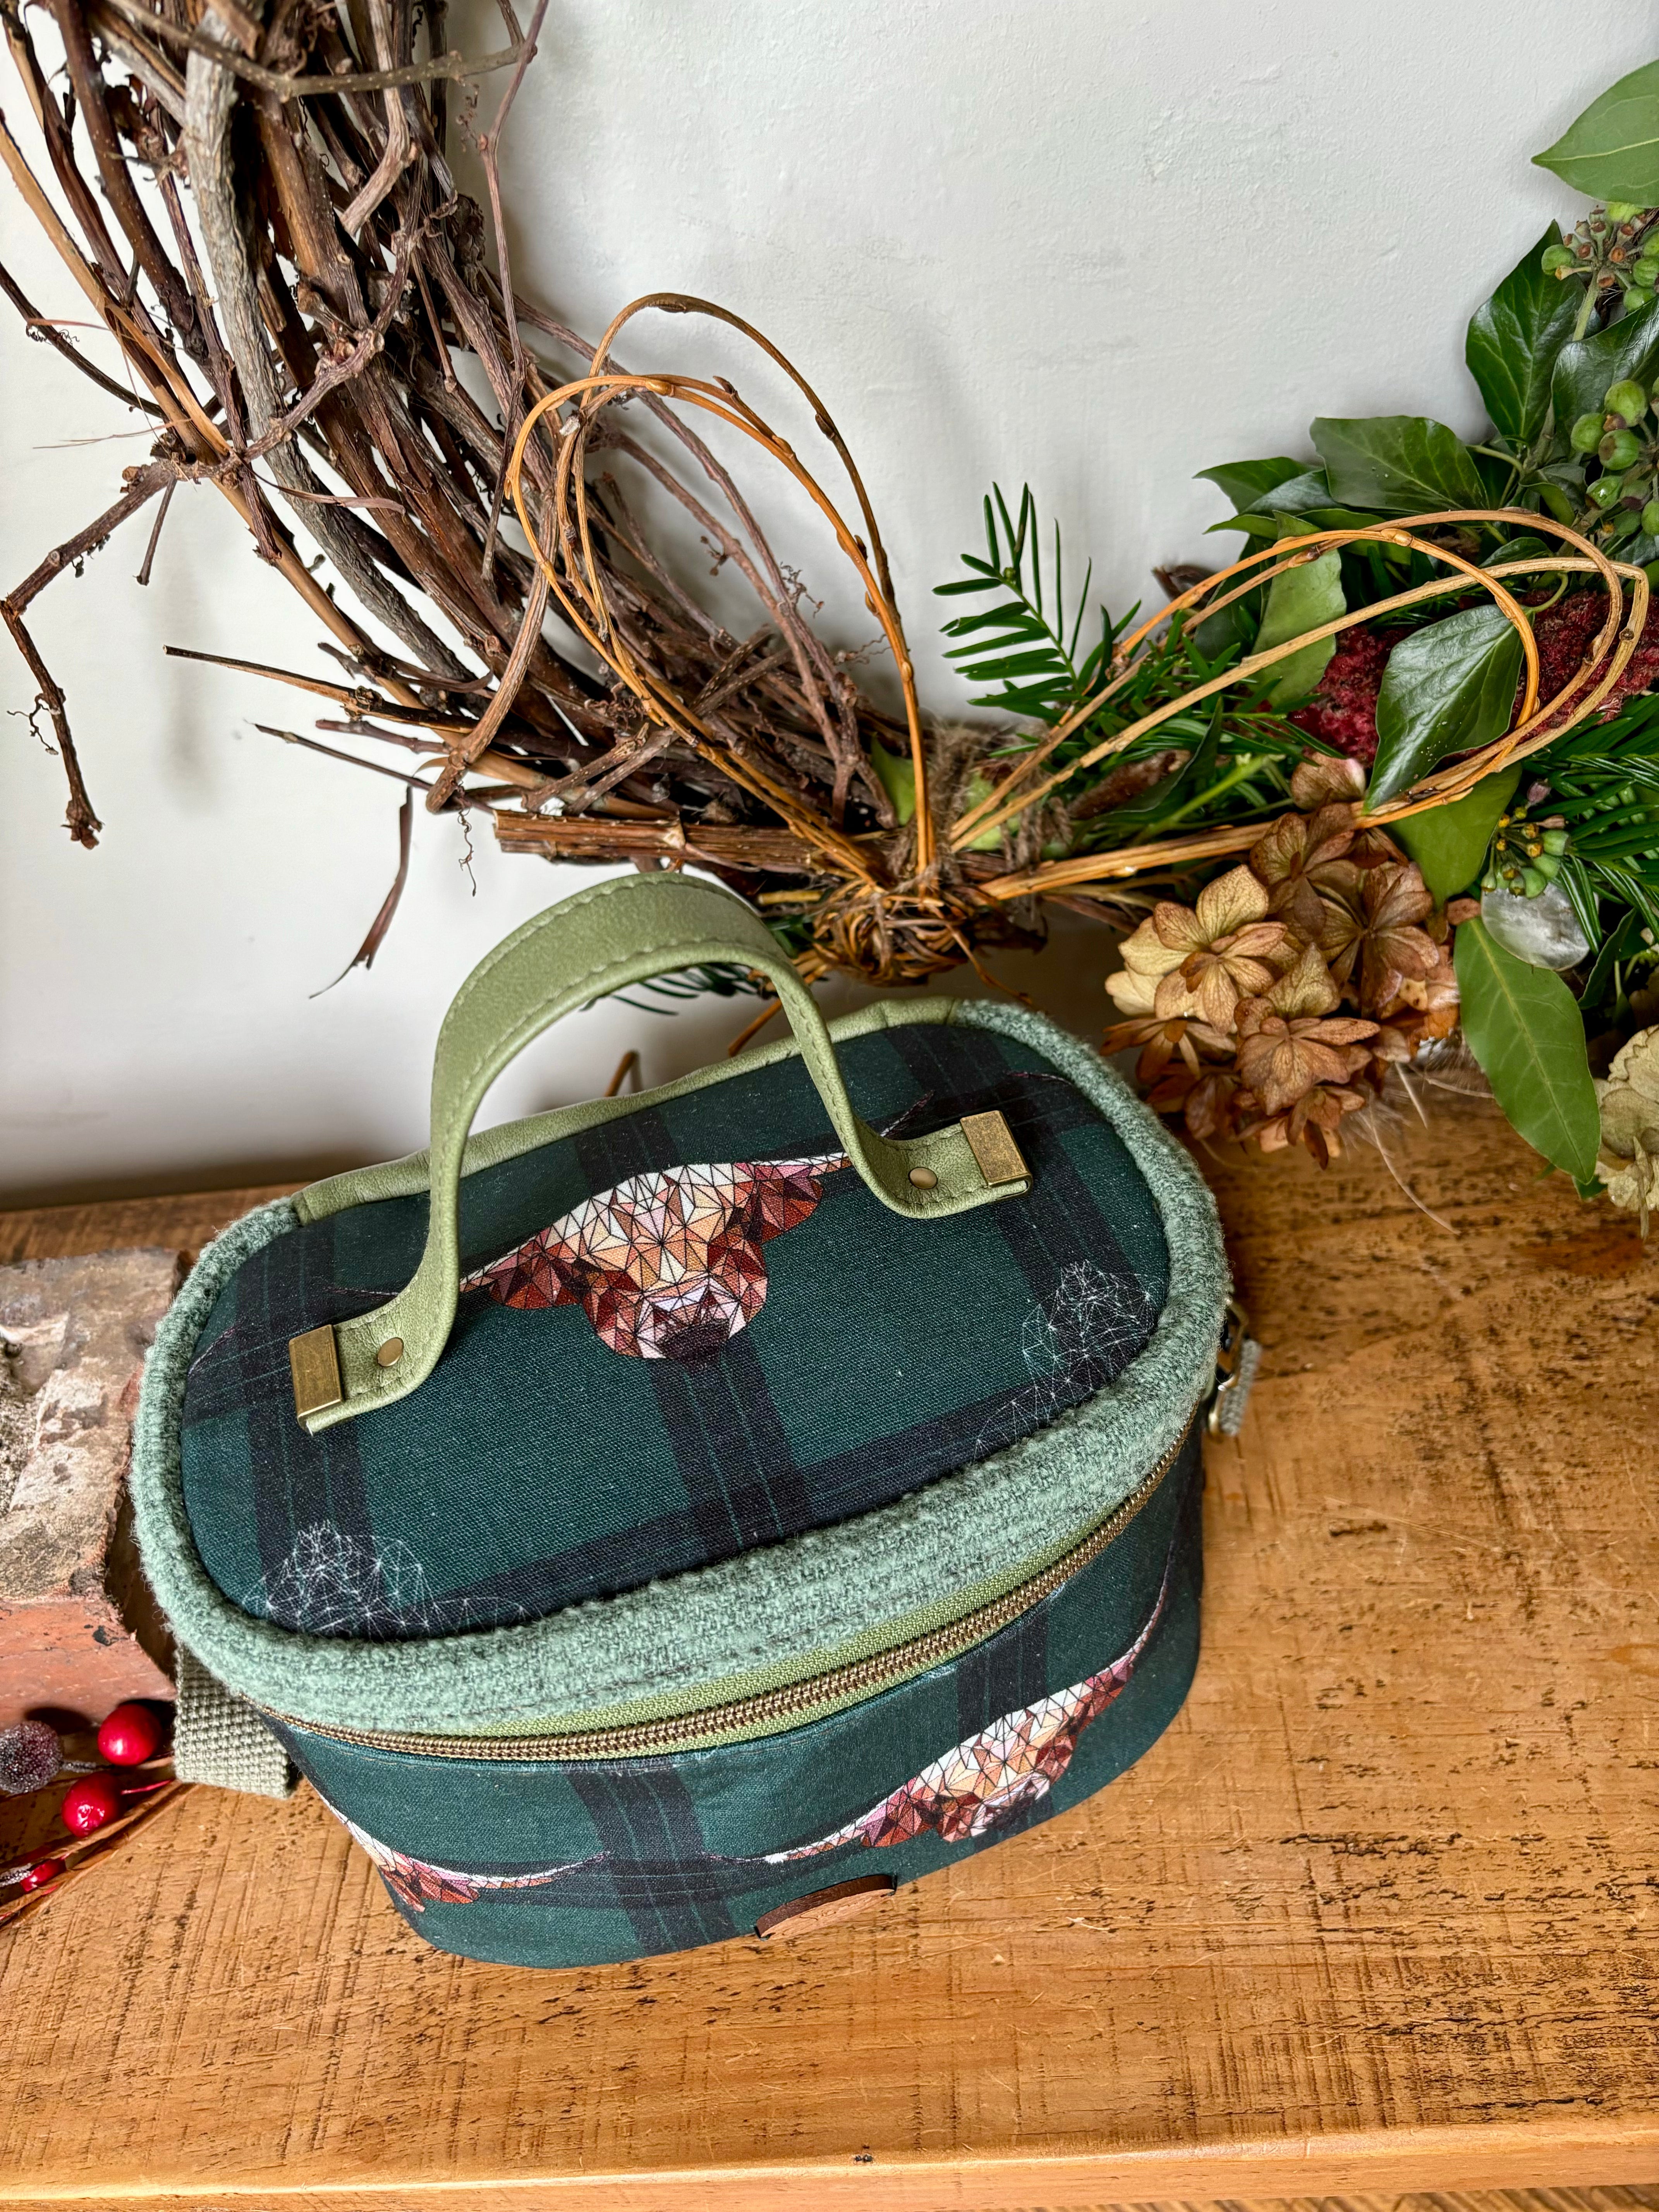 Charming Highland Cows Teresita Train Case, showcasing adorable Highland cattle in a picturesque design in green hues, providing both functionality and delightful aesthetics for your travel essentials.